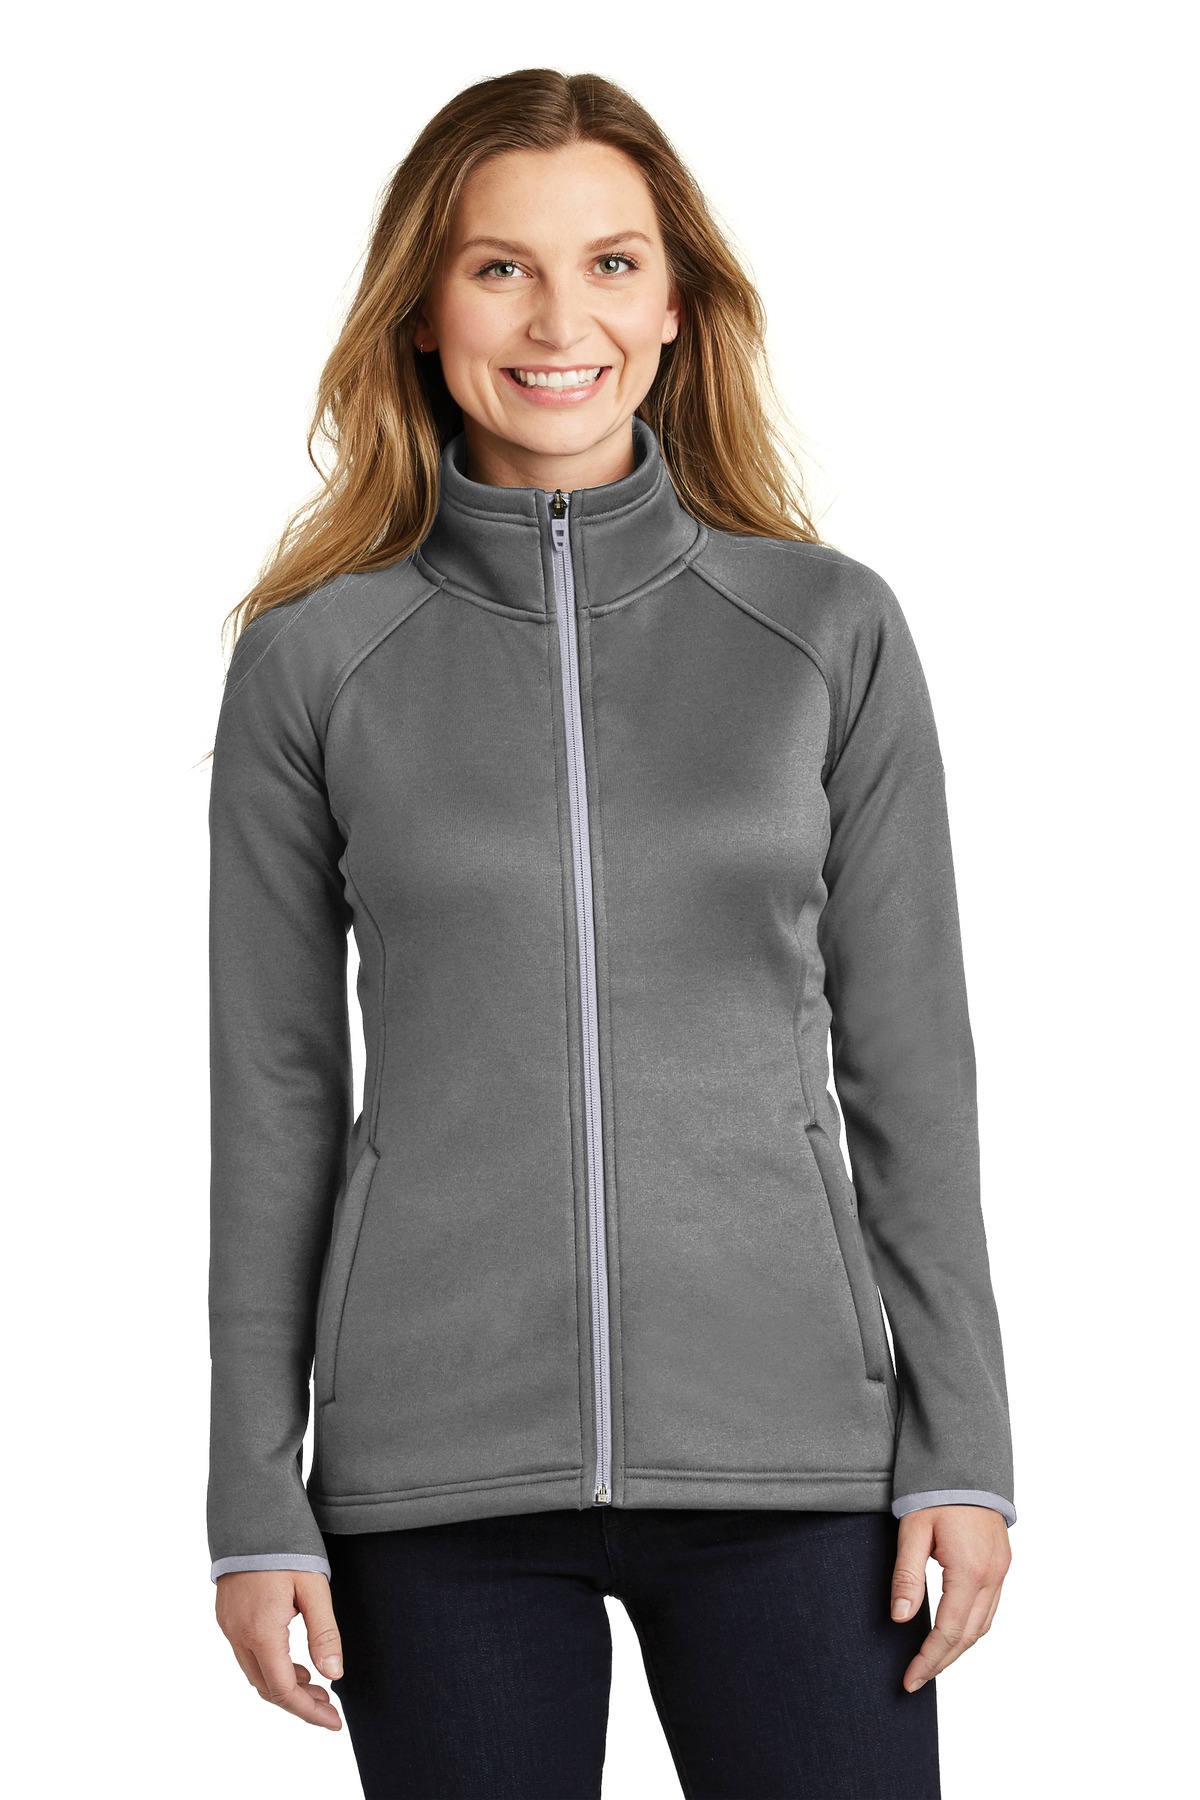 Buy The North Face Ladies Canyon Flats Stretch Fleece Jacket ...